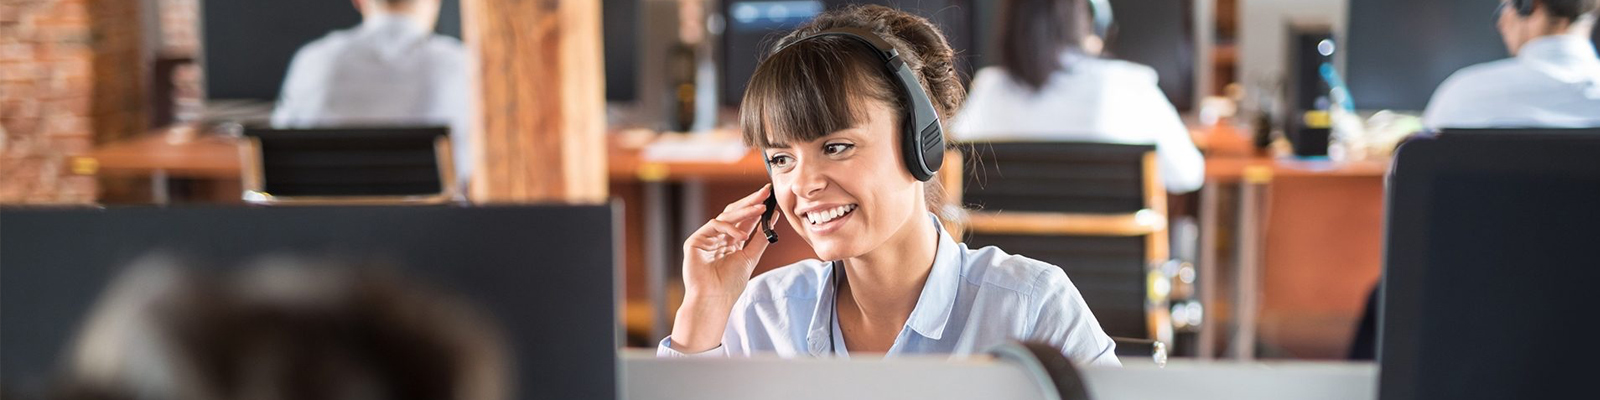 Woman with talking on a headset in call center.